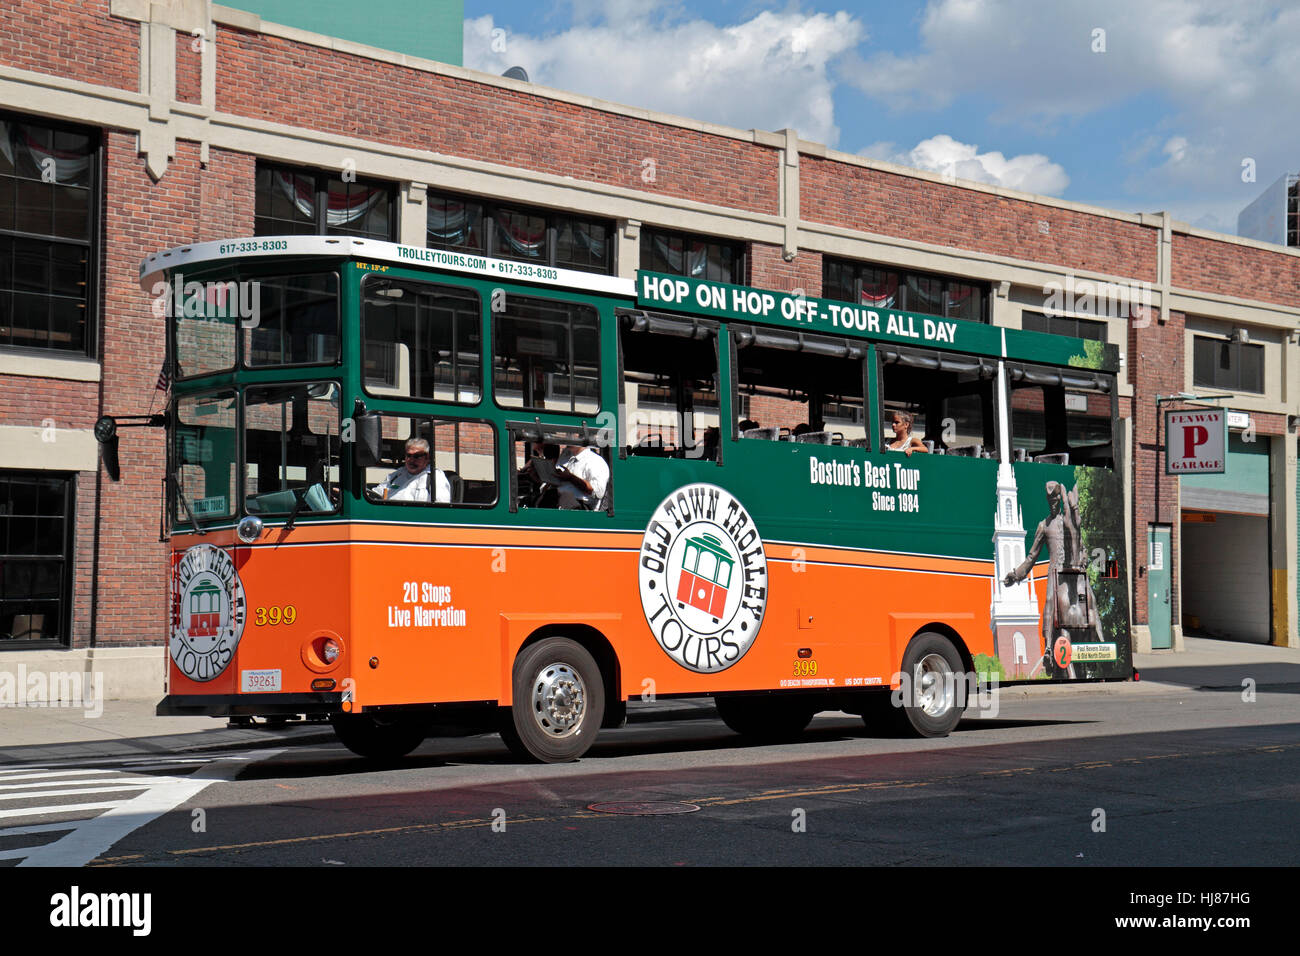 An Old Town Trolley Tours trolley bus outside Fenway Park, home of the Boston Red Sox, Boston, MA, United States. Stock Photo